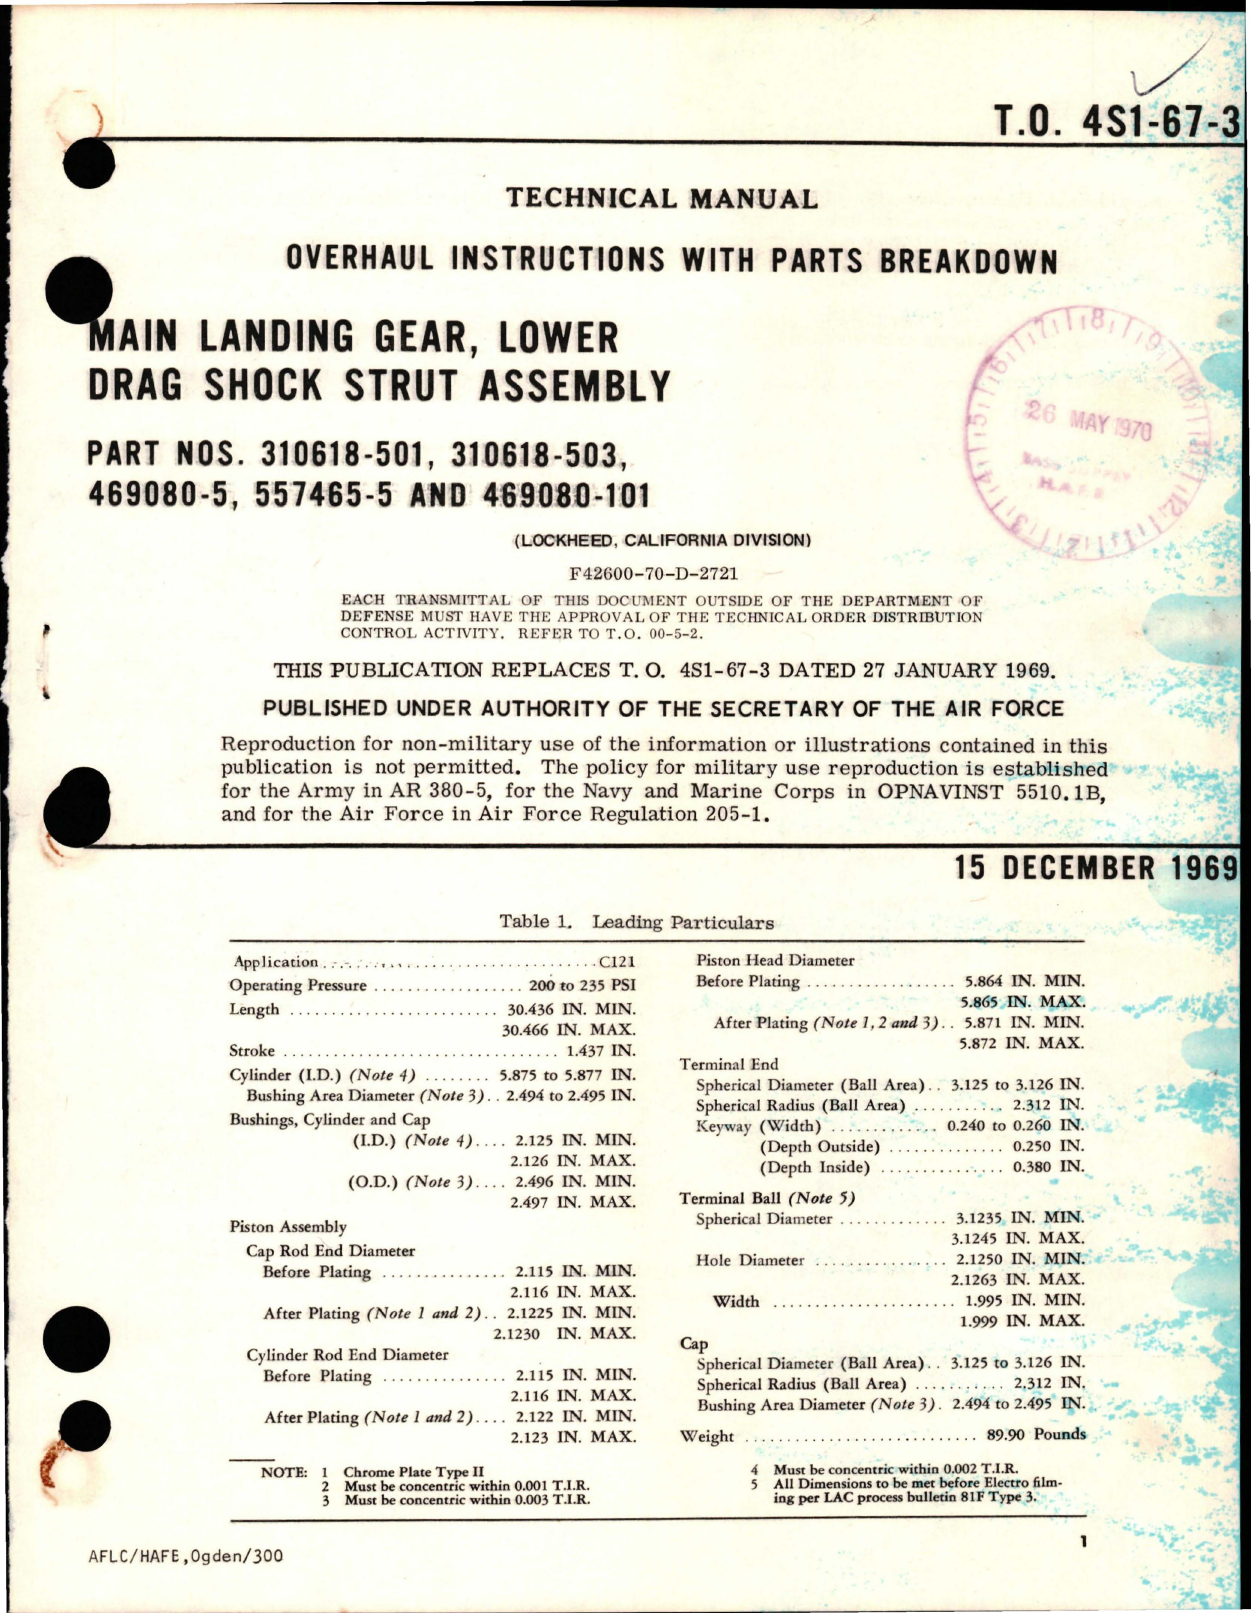 Sample page 1 from AirCorps Library document: Overhaul Instructions with Parts Breakdown for Main Landing Gear - Lower Drag Shock Strut Assembly